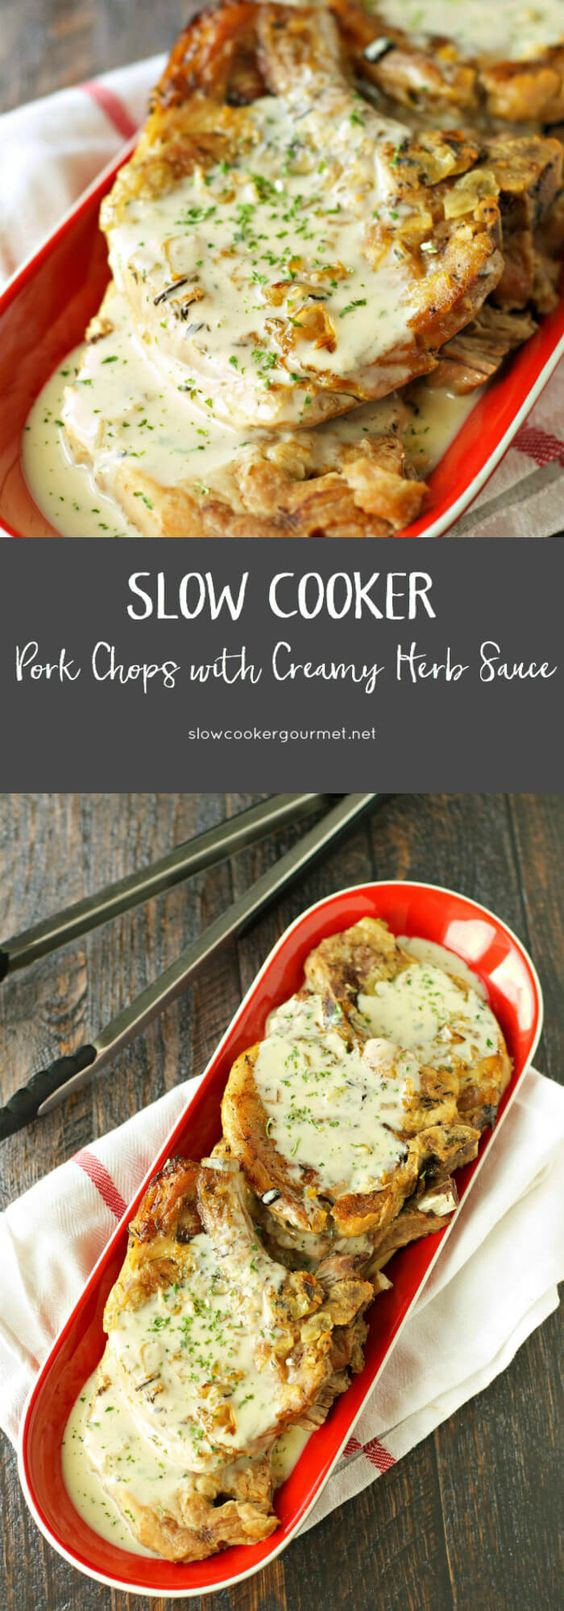 Slow Cooker Keto Pork Chops
 7 Easy Keto Pork Chop Recipes That Are Beyond Delicious